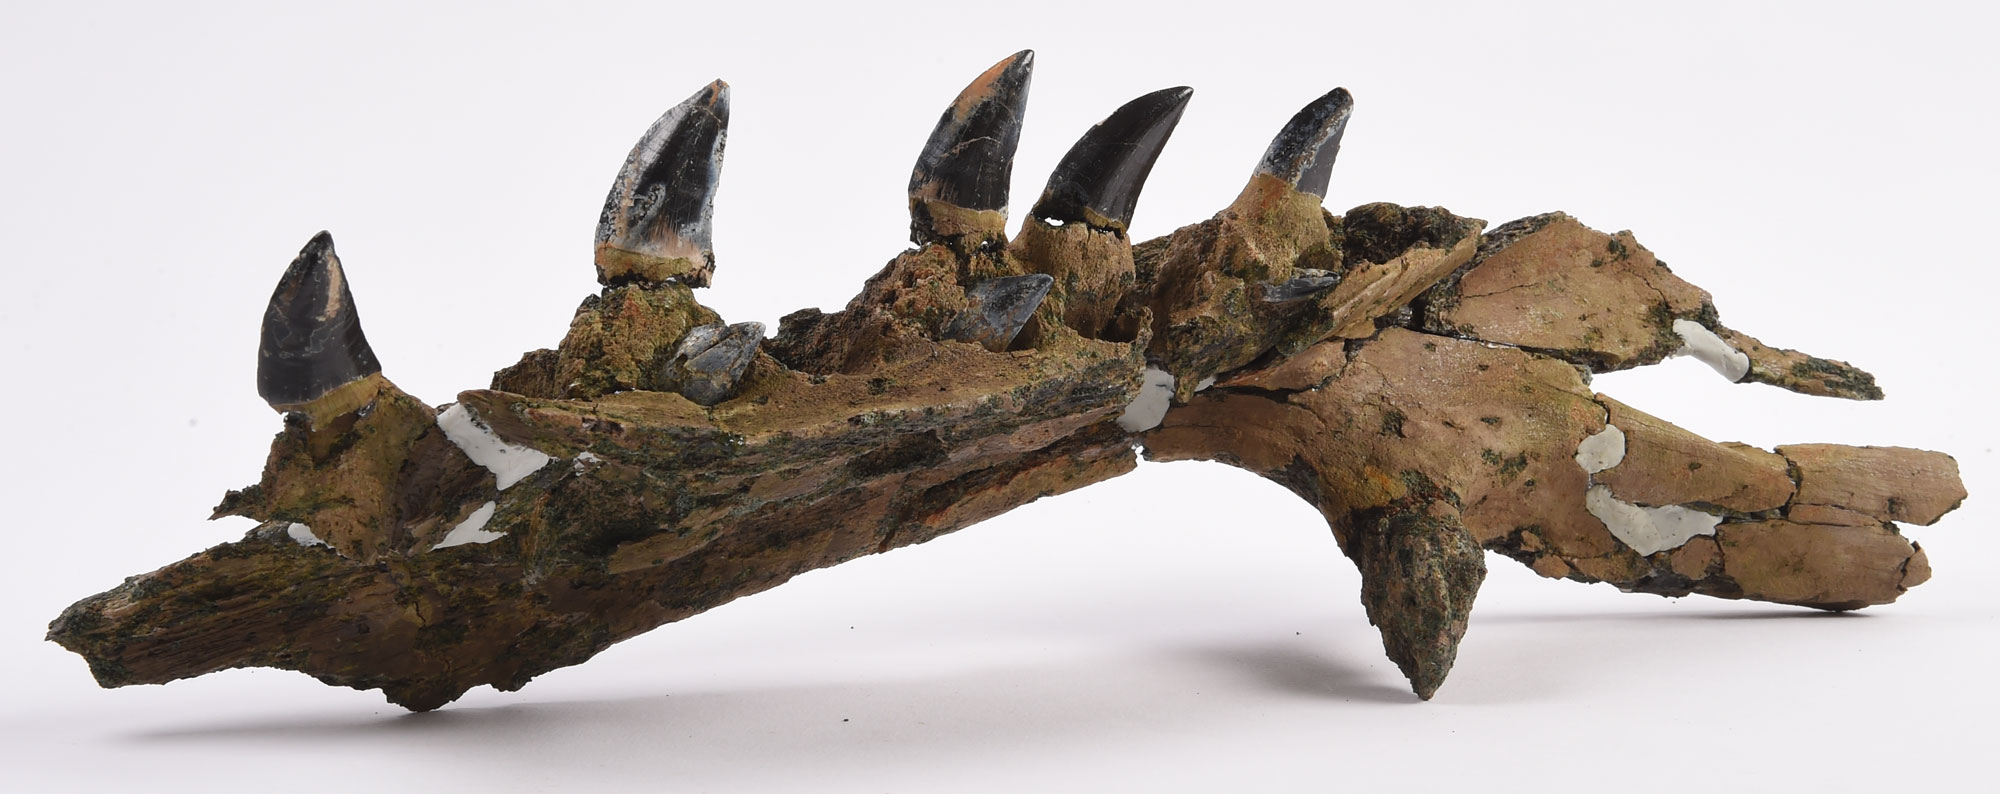 Photograph of part of a mosasaur jaw from the Cretaceous of New Jersey. The photo shows a piece of jaw with five teeth.